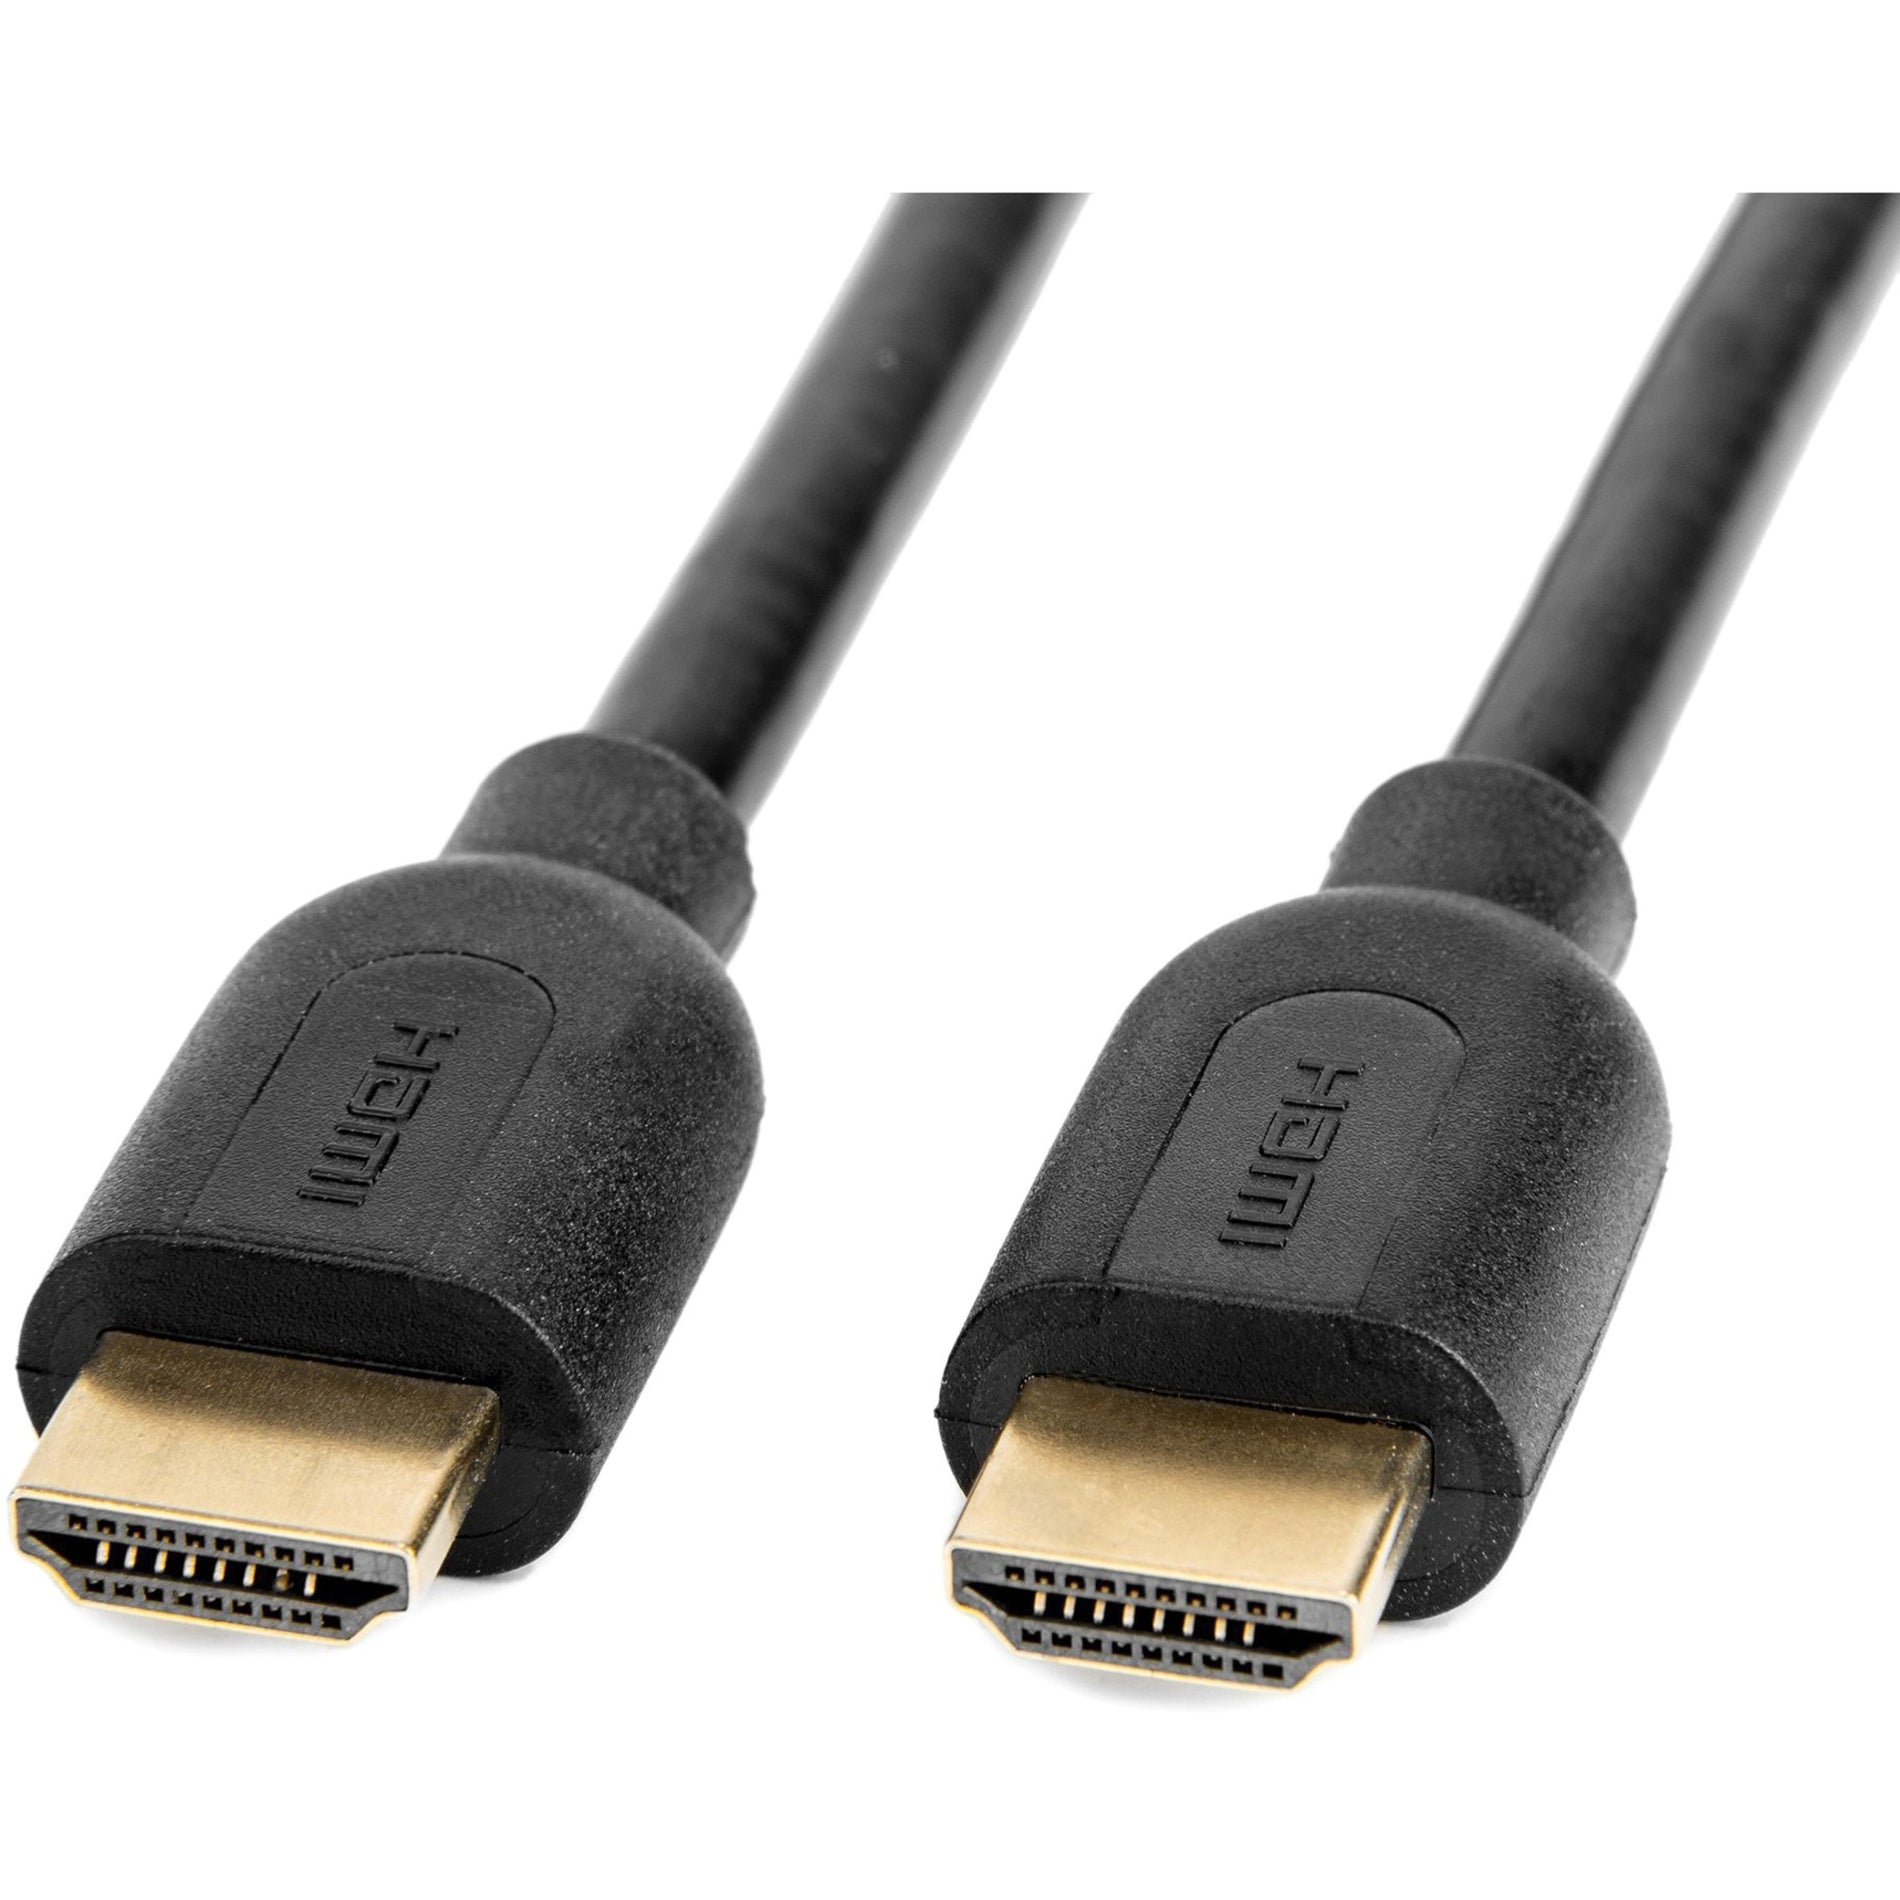 Rocstor Y10C107-B1 Premium High Speed HDMI Cable with Ethernet, 6ft, Gold-Plated Connectors, 10.2 Gbit/s Data Transfer Rate